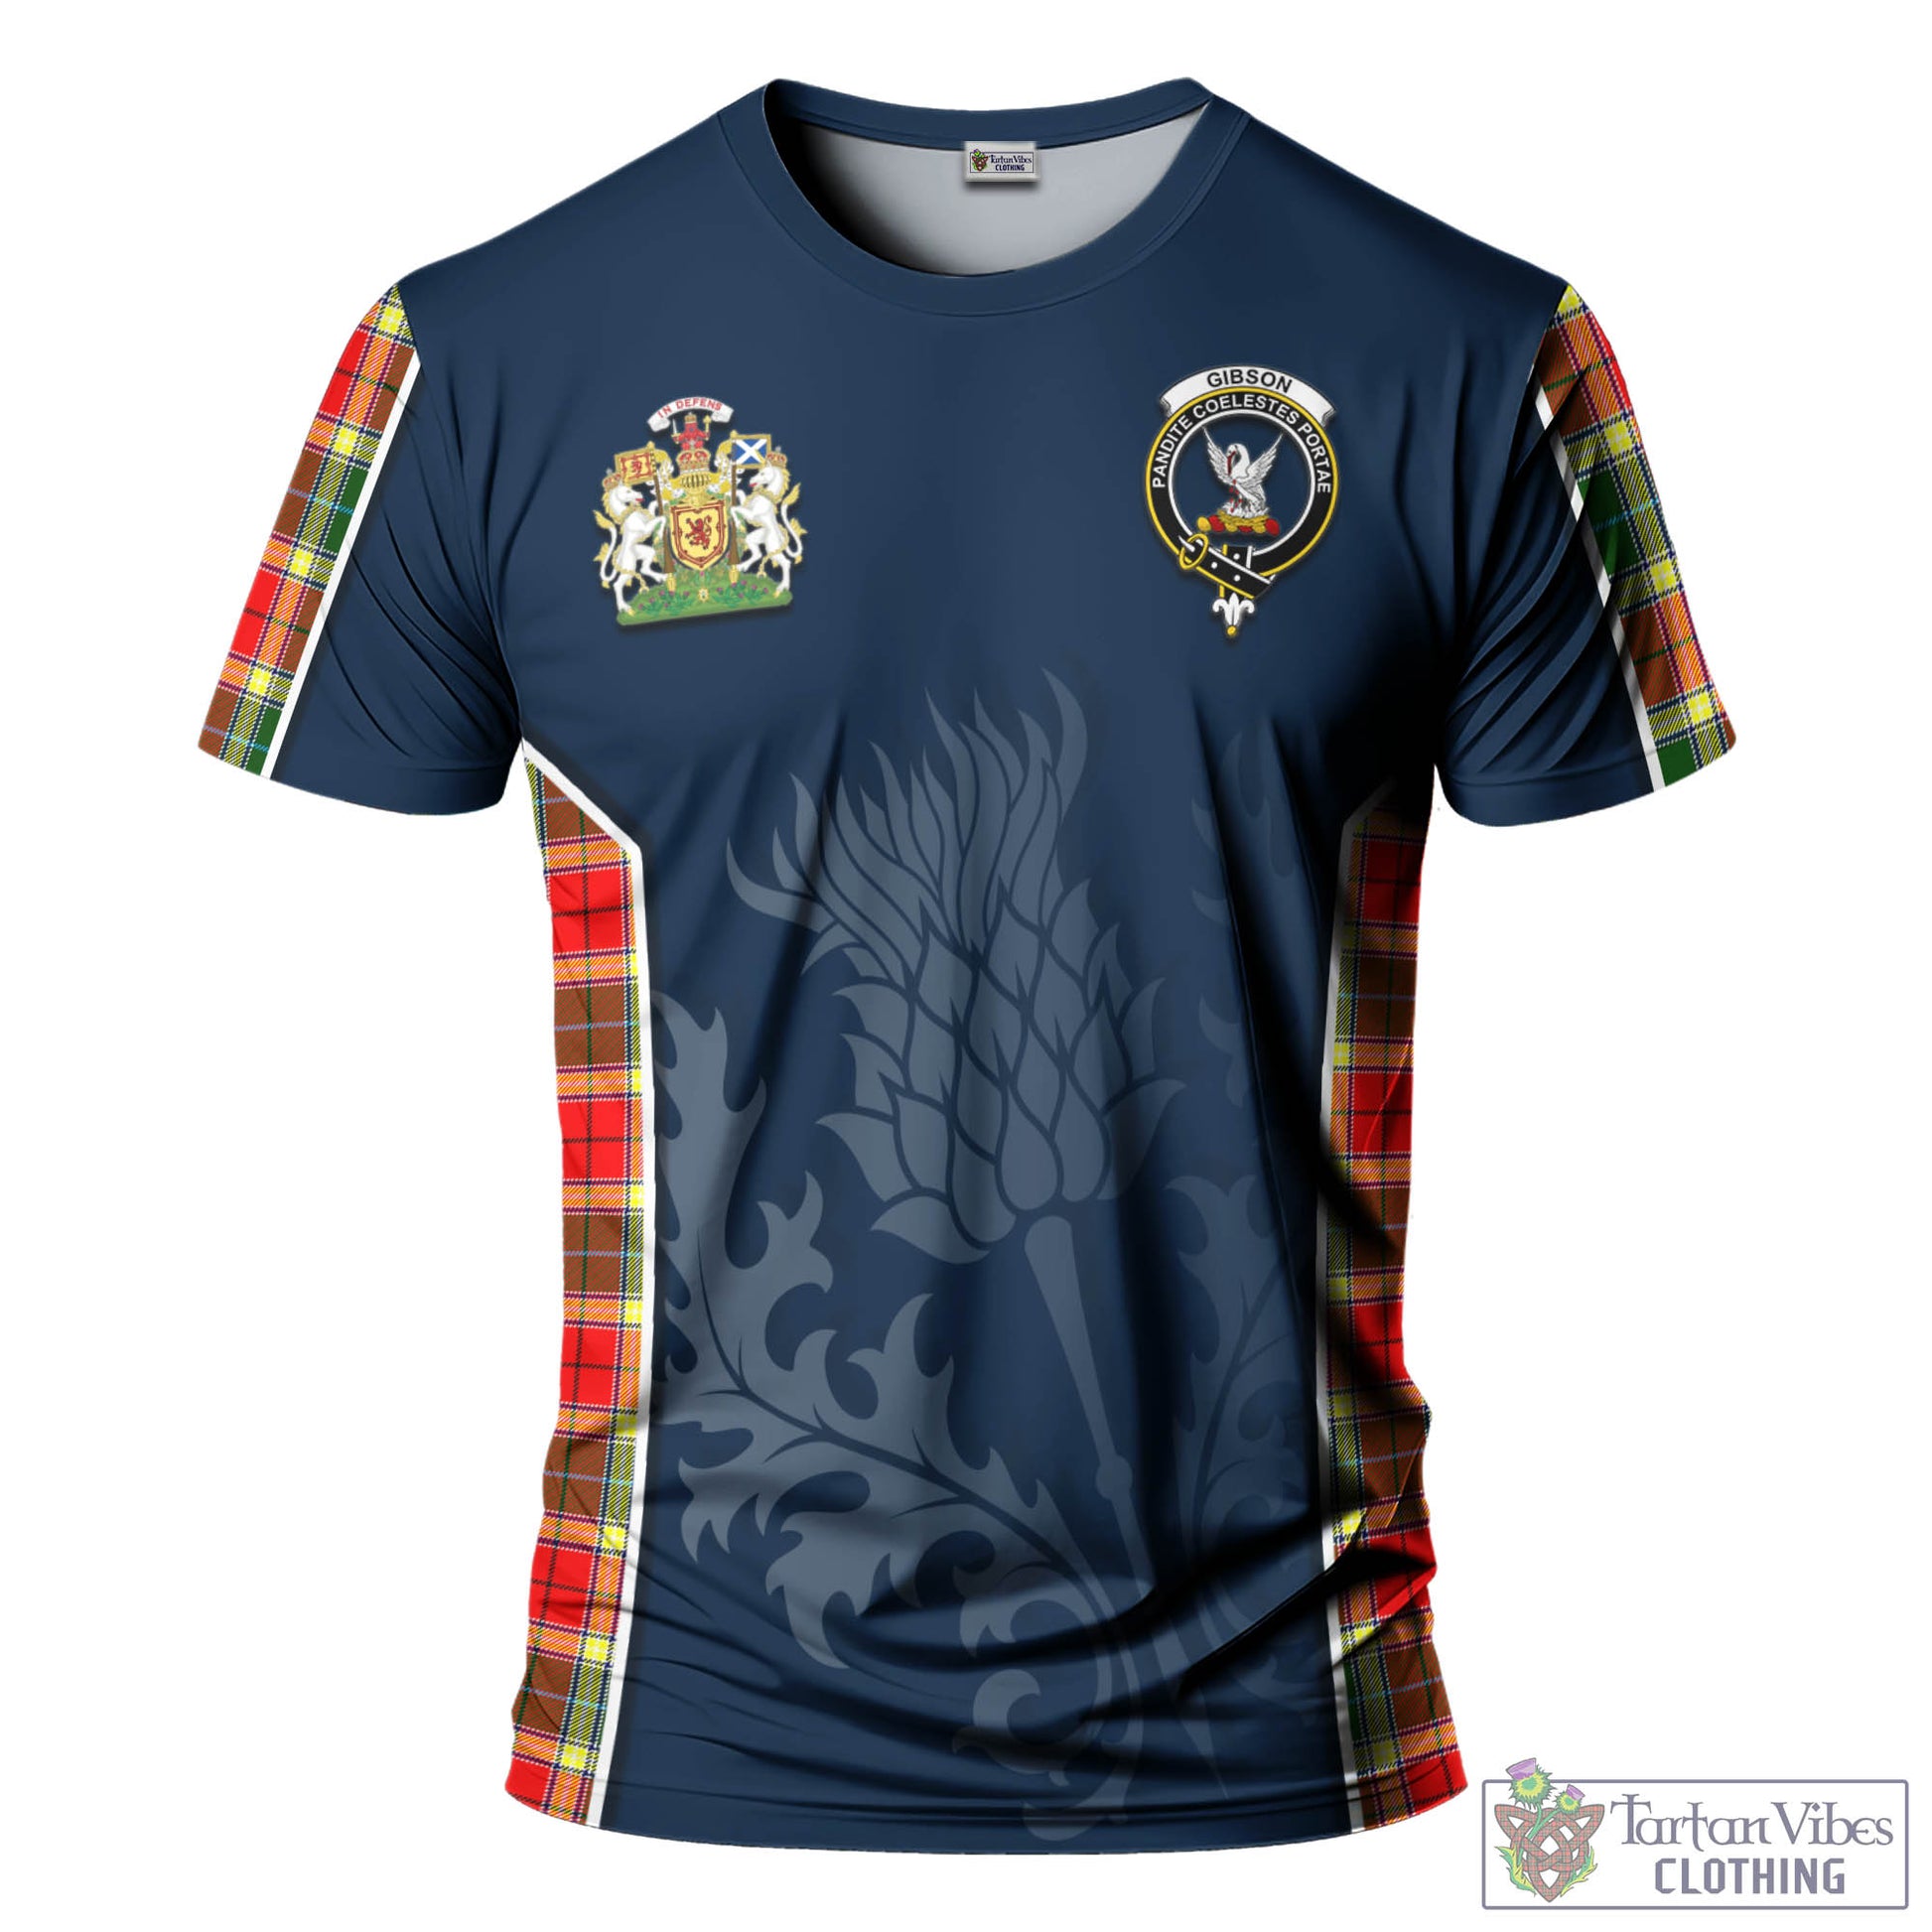 Tartan Vibes Clothing Gibsone (Gibson-Gibbs) Tartan T-Shirt with Family Crest and Scottish Thistle Vibes Sport Style